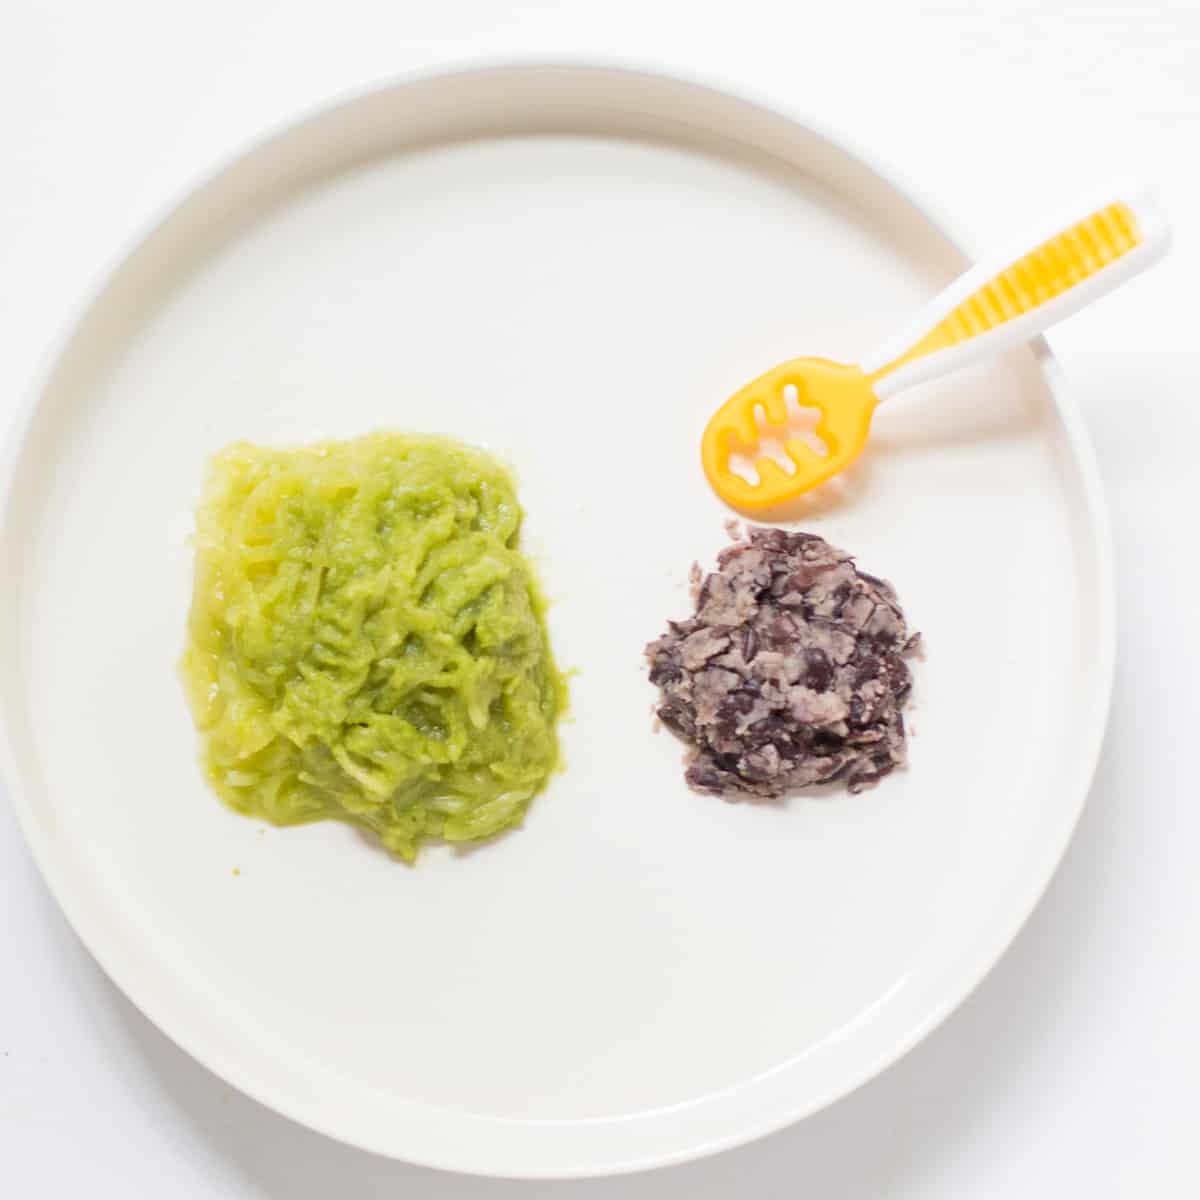 Cooked spaghetti squash tossed with pesto with mashed black beans.